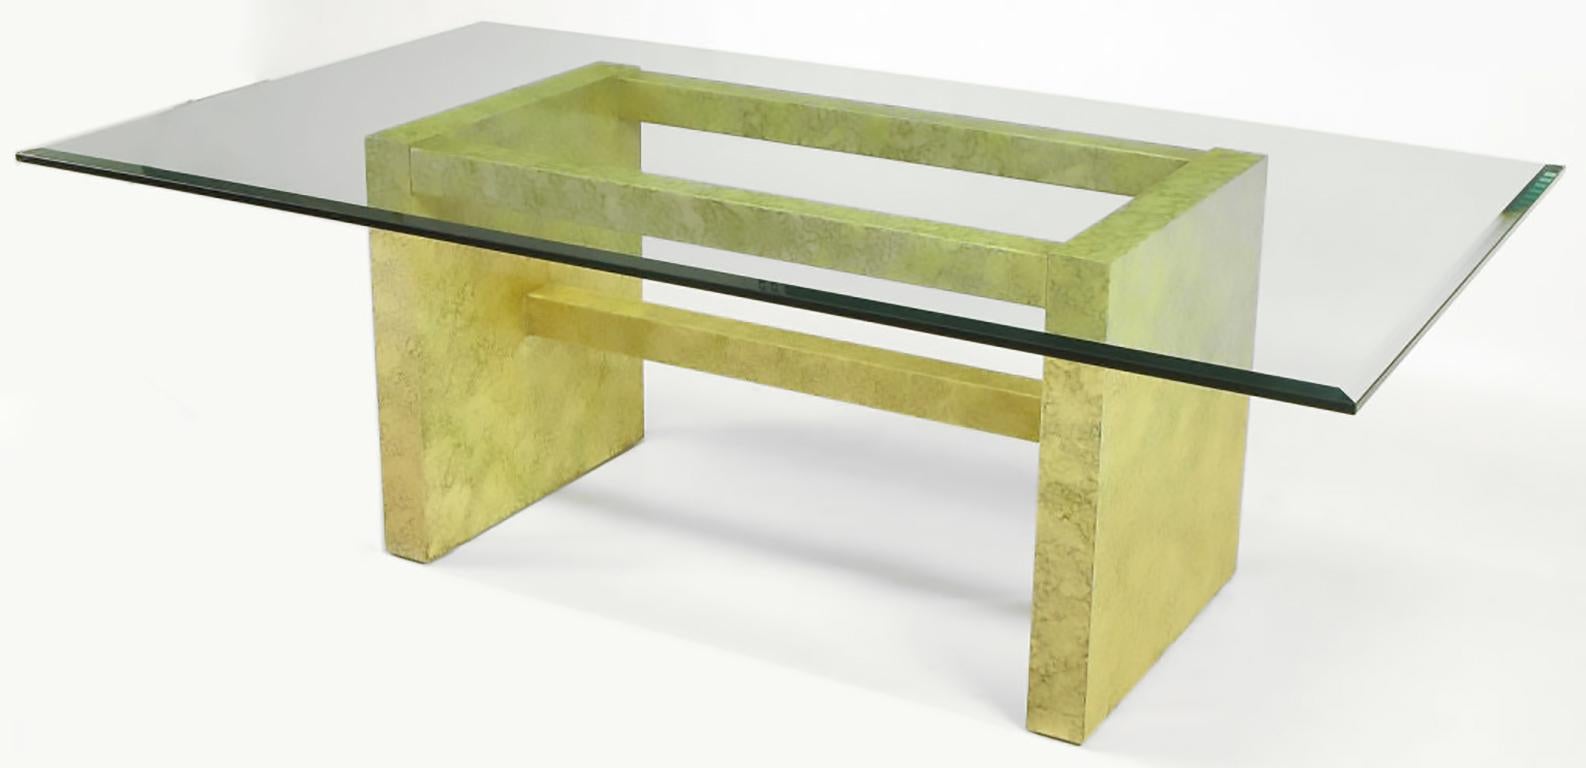 Henredon circa 1975 Glass and Marbleized Base Dining Table In Good Condition For Sale In Chicago, IL